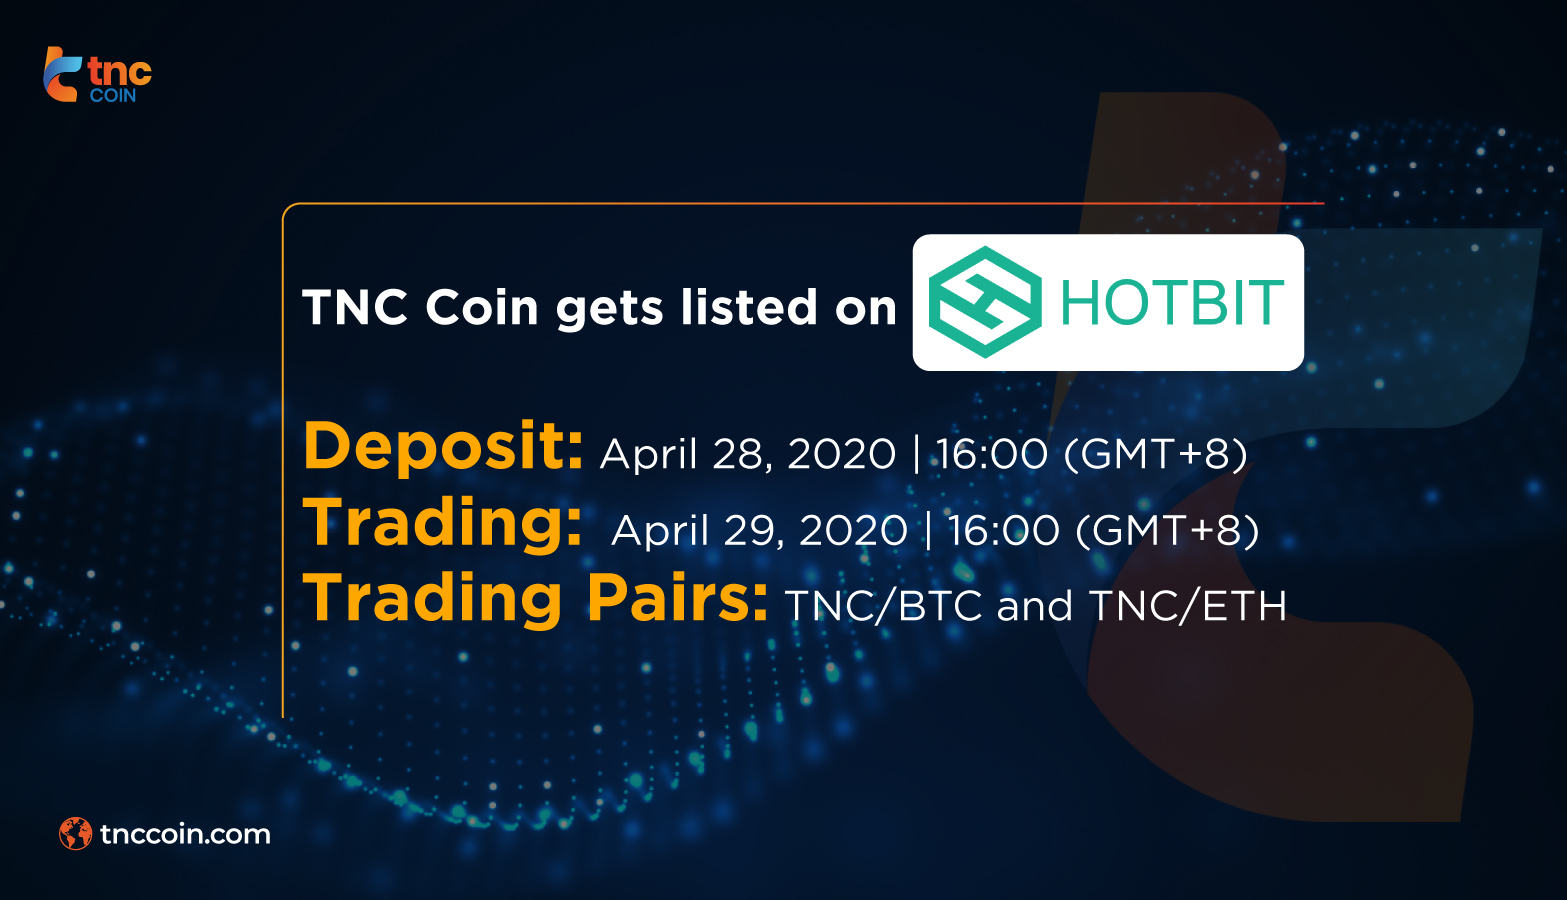 TNC Coin gets listed on HotBit